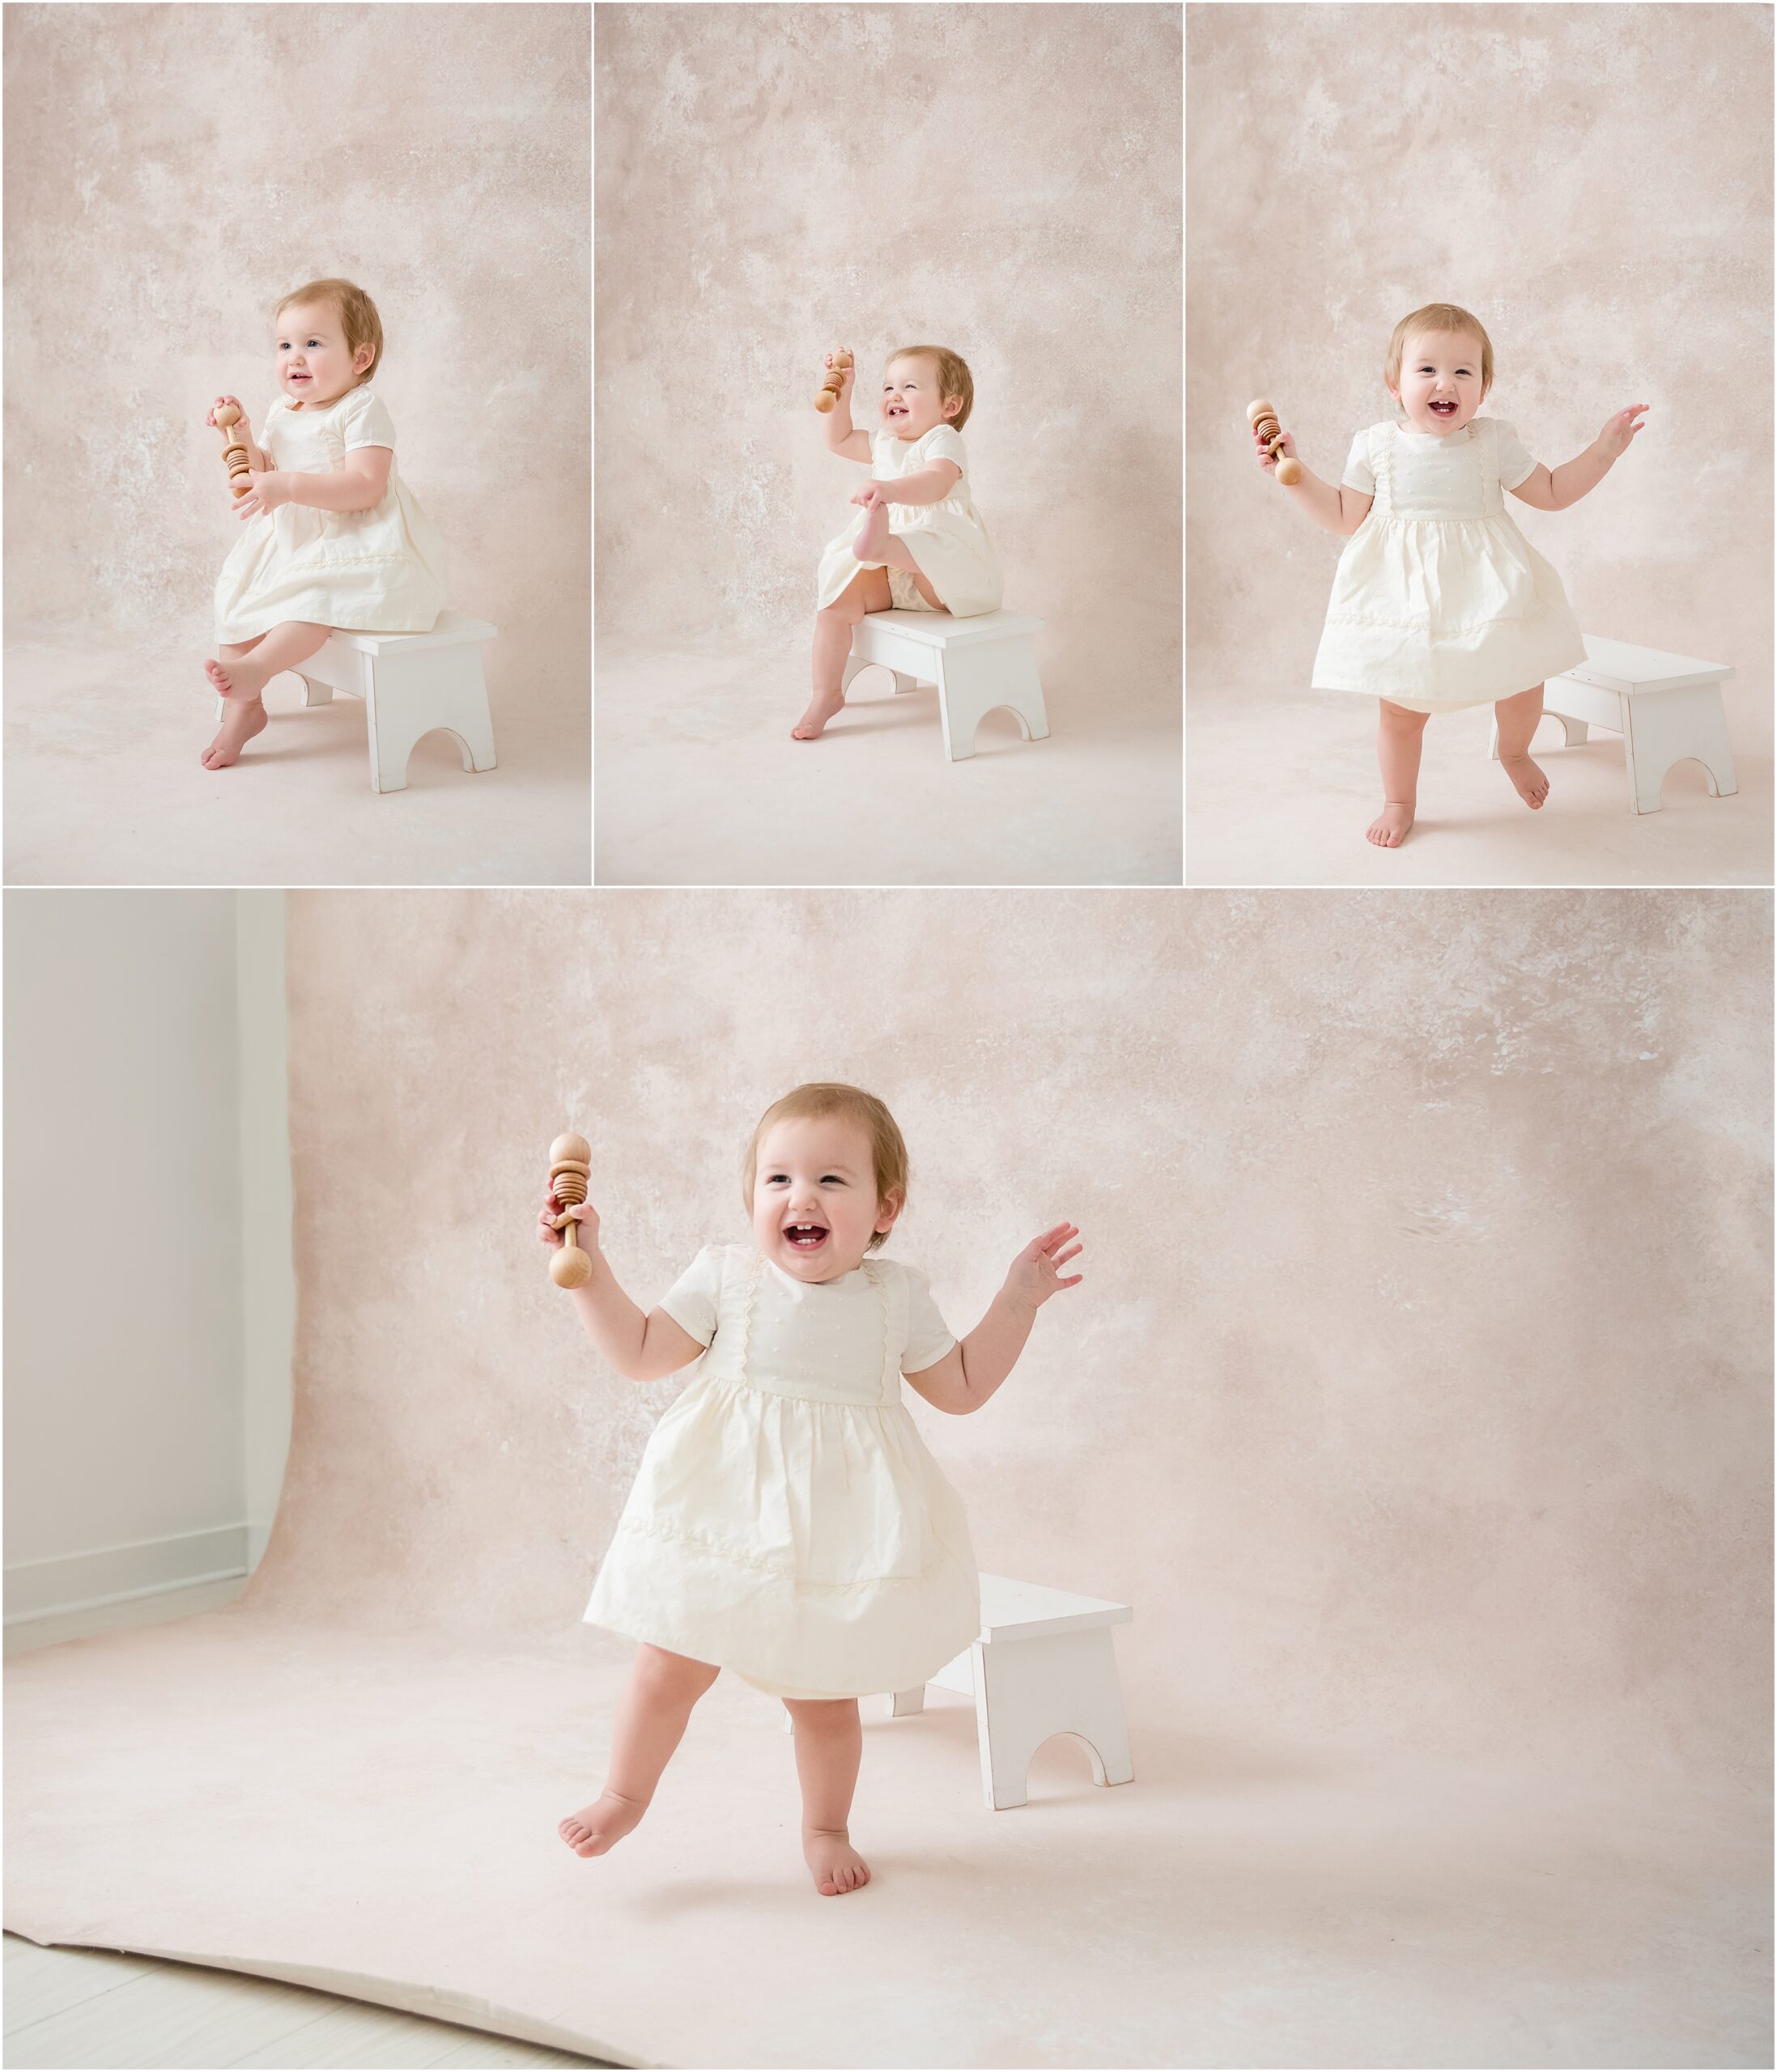 Collage of photos of a baby girl wearing a white dress, sitting on a white bench and walking, with a pink textured canvas background